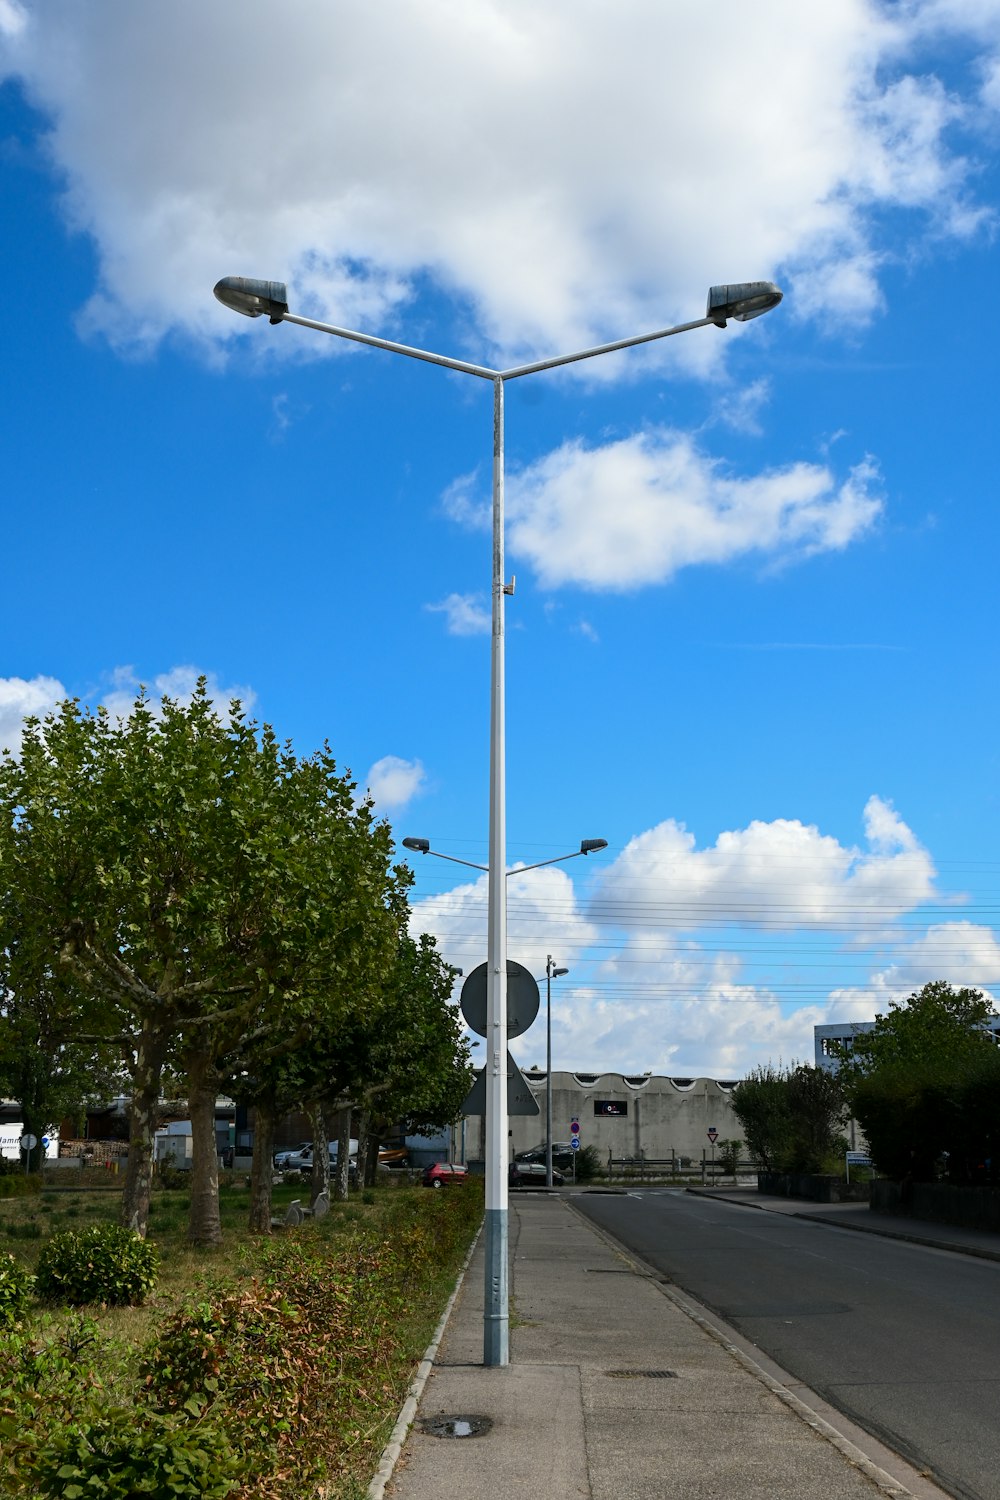 a street light sitting on the side of a road